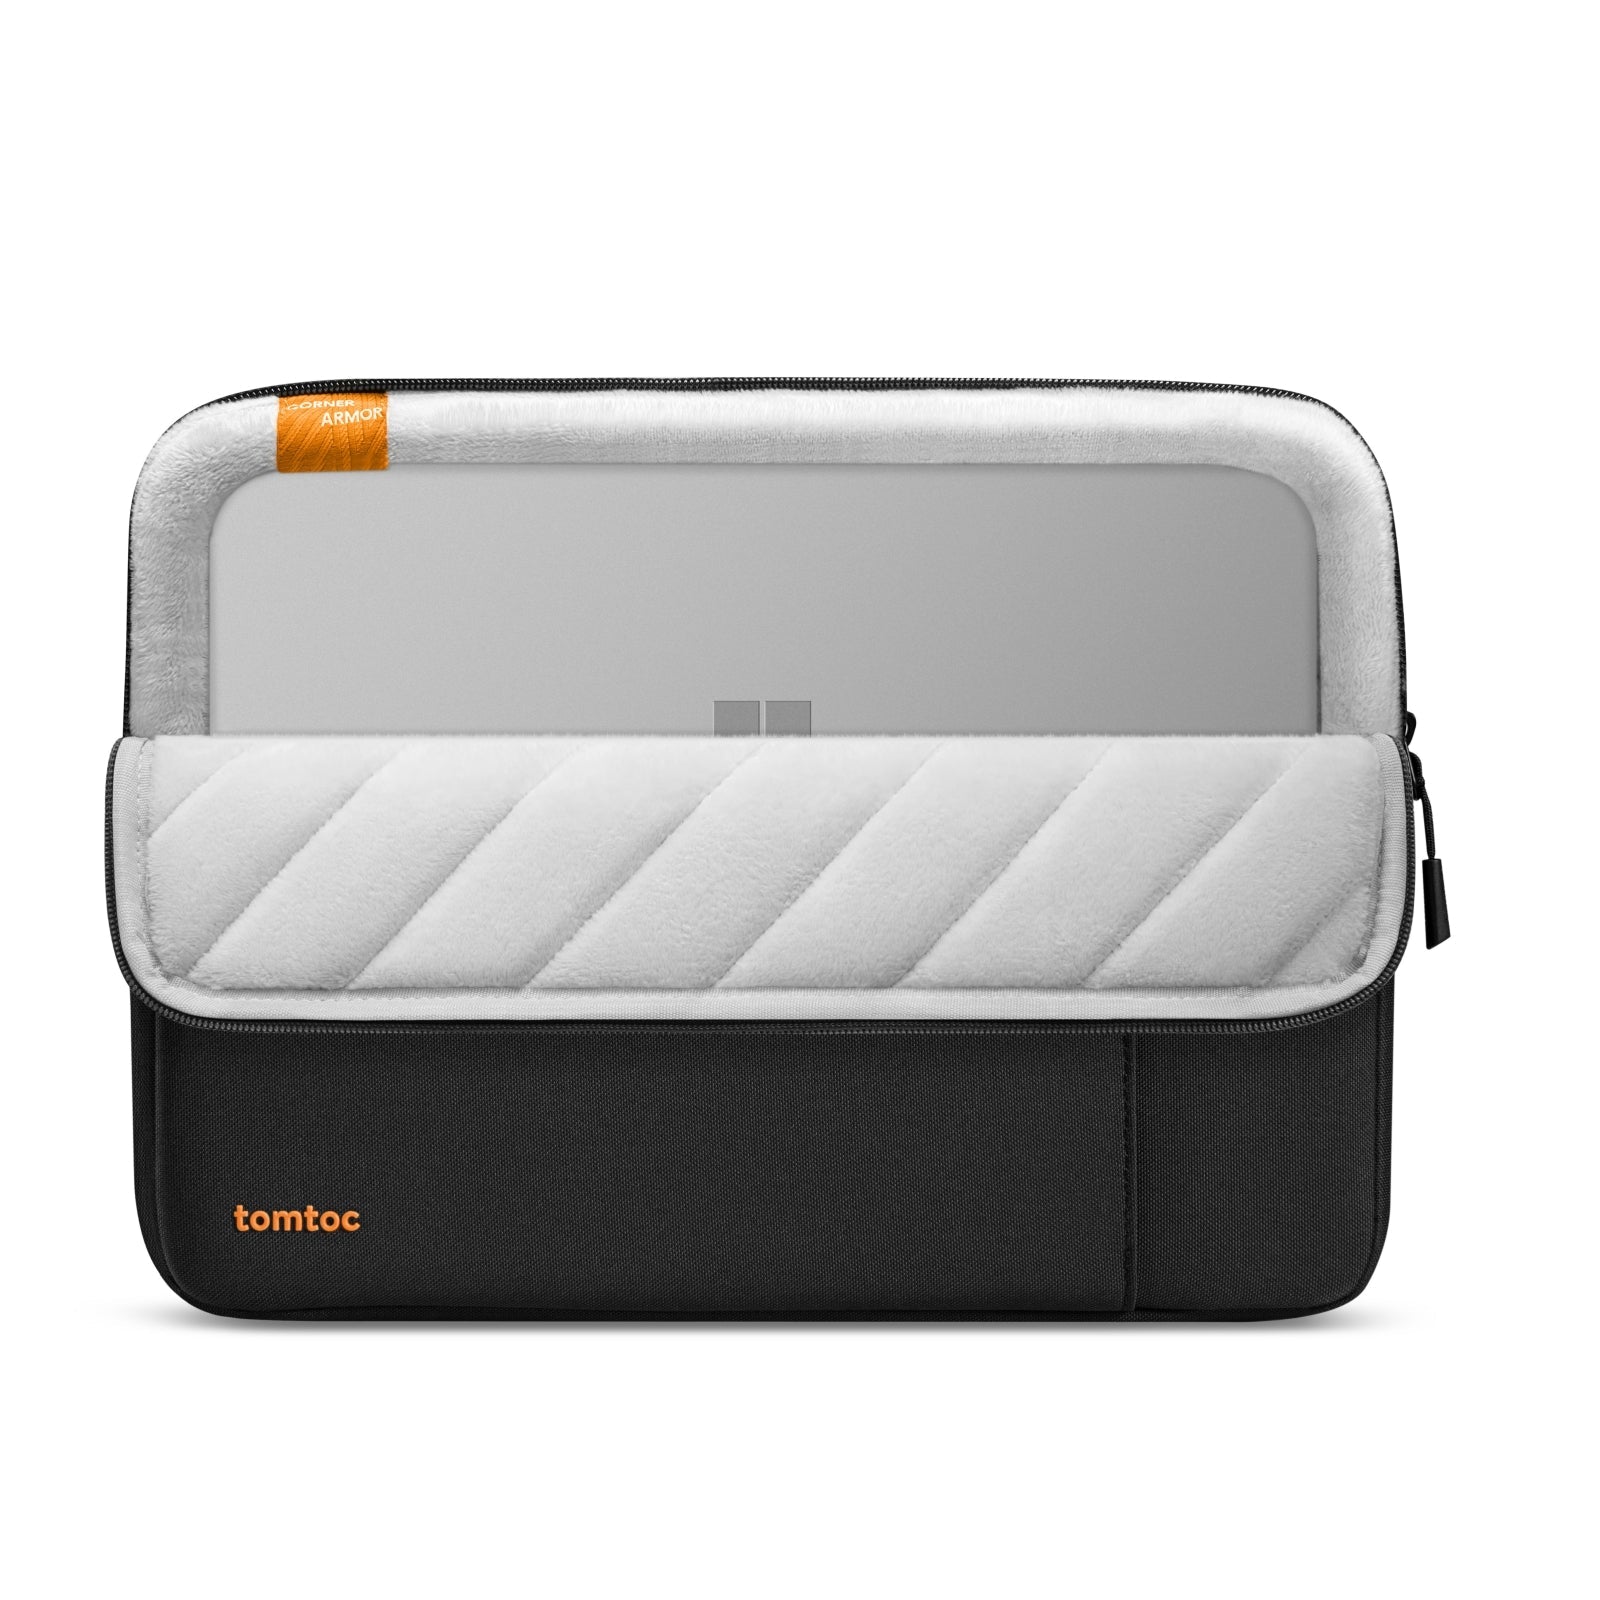 Defender-A13 Laptop Sleeve for 11.6-13 inch universal laptop